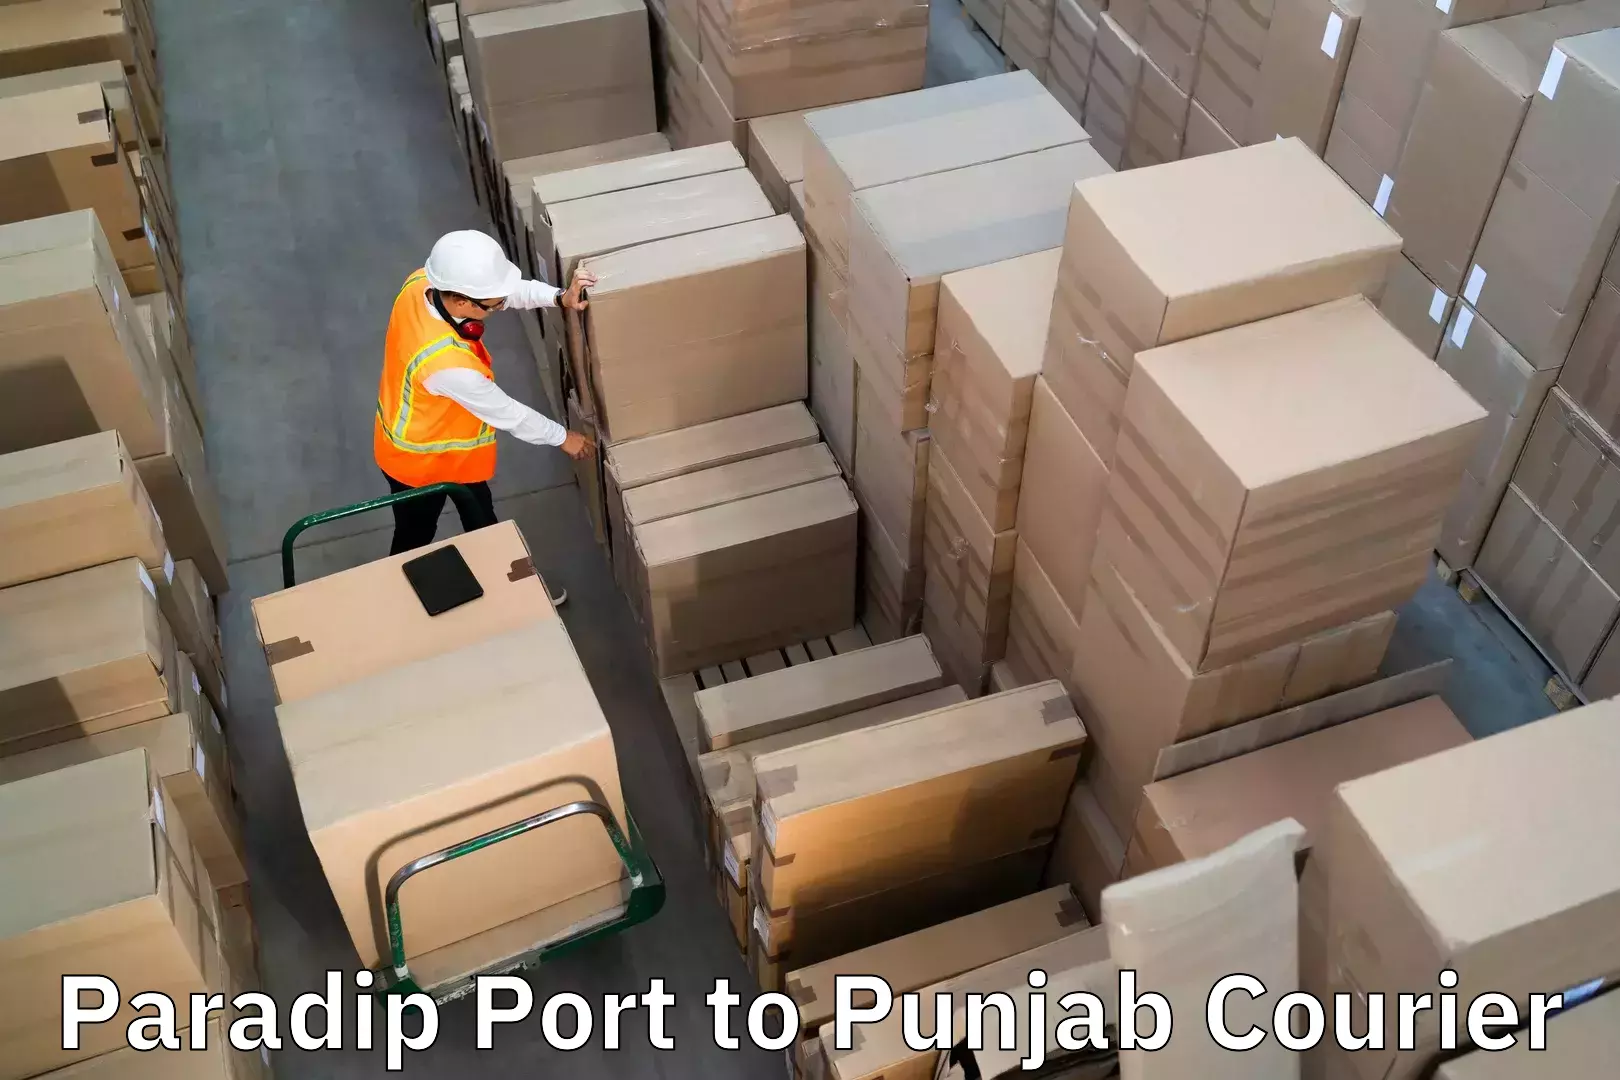 Luggage delivery app Paradip Port to Punjab